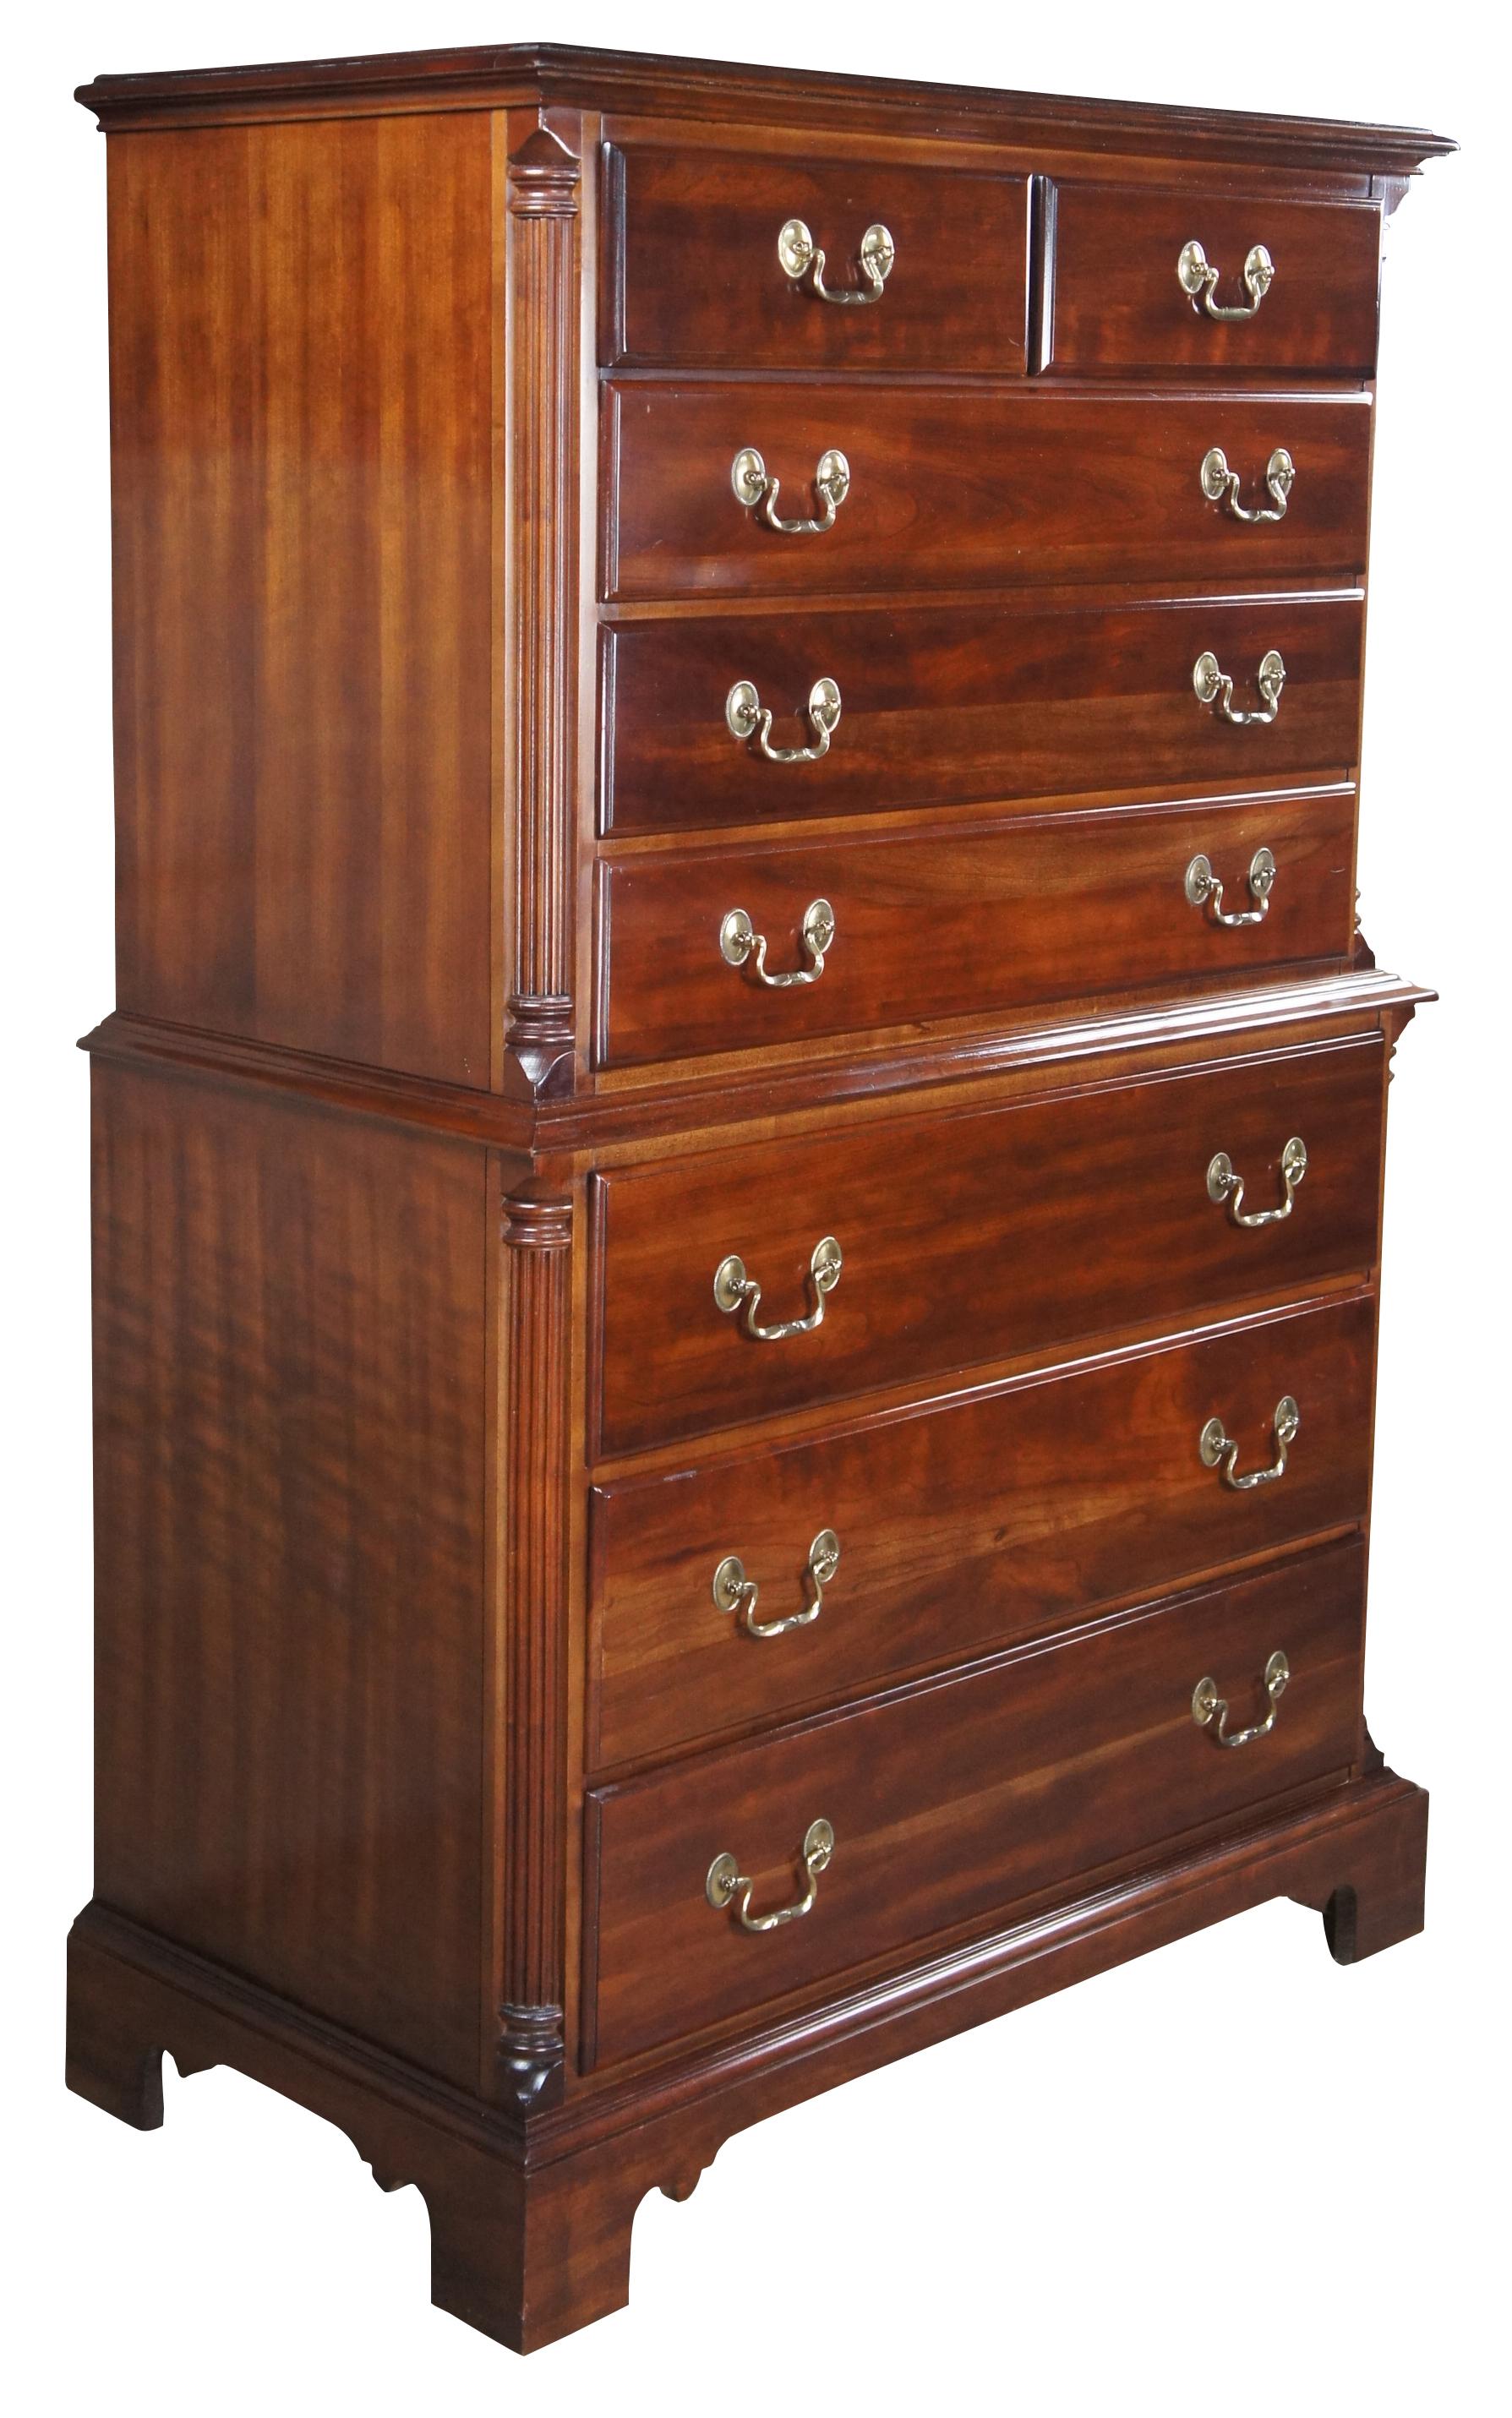 Vintage National Mt. airy fruniture company dresser, circa last quarter 20th century. A chest on chest form made from cherry. featuring quarter cut columns, bracket feet and brass bale drawer pulls. 1092, 252.

Mount Airy of North Carolina's roots